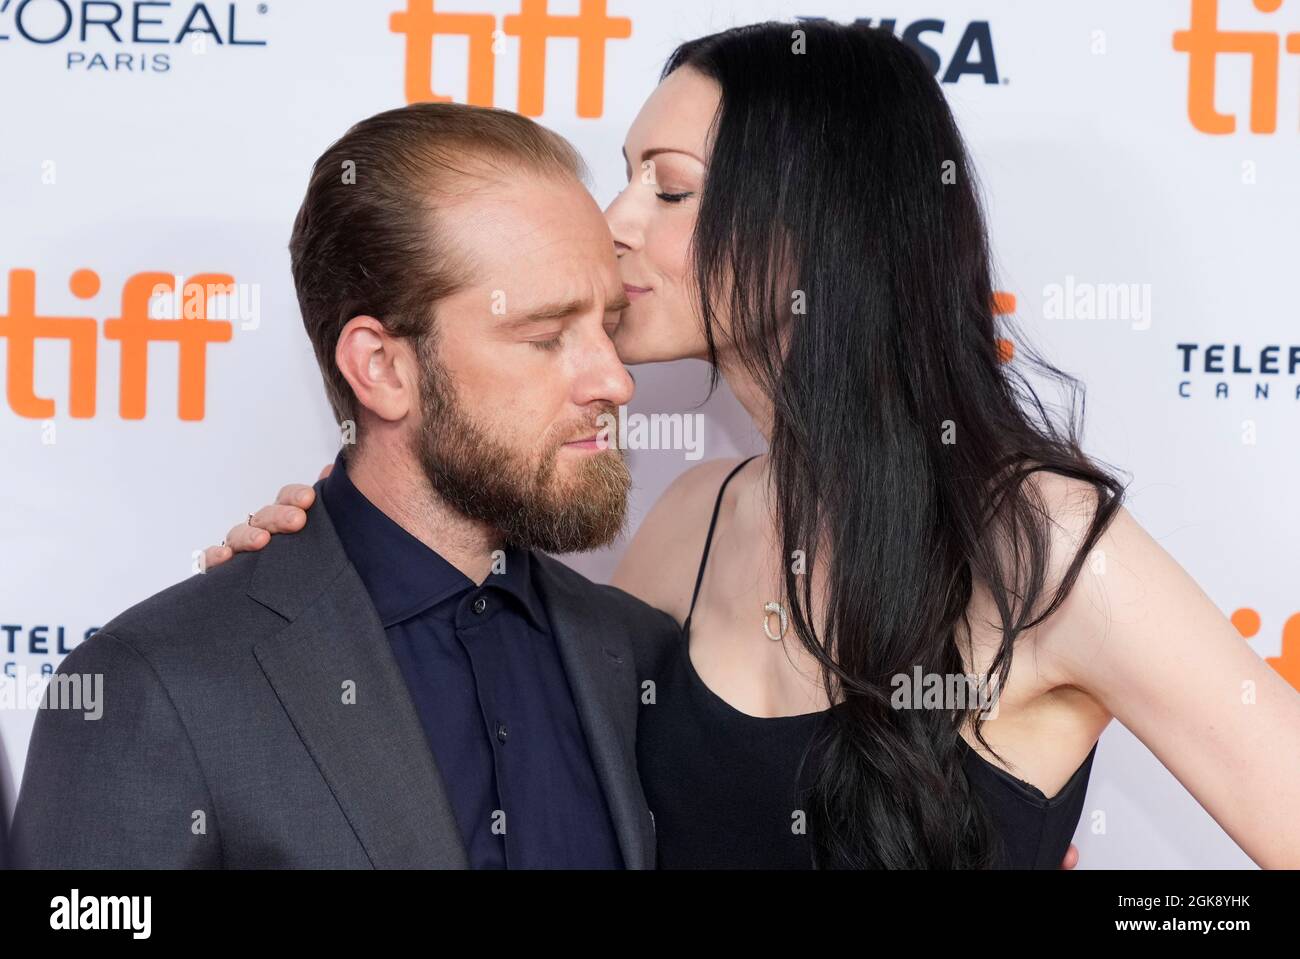 The Survivor 2021 Actors Laura Prepon and Ben Foster arrive for the premiere of "The Survivor"  at the Toronto International Film Festival (TIFF) in Toronto, Ontario,  Canada September 13, 2021. REUTERS/Mark Blinch Stock Photo - Alamy